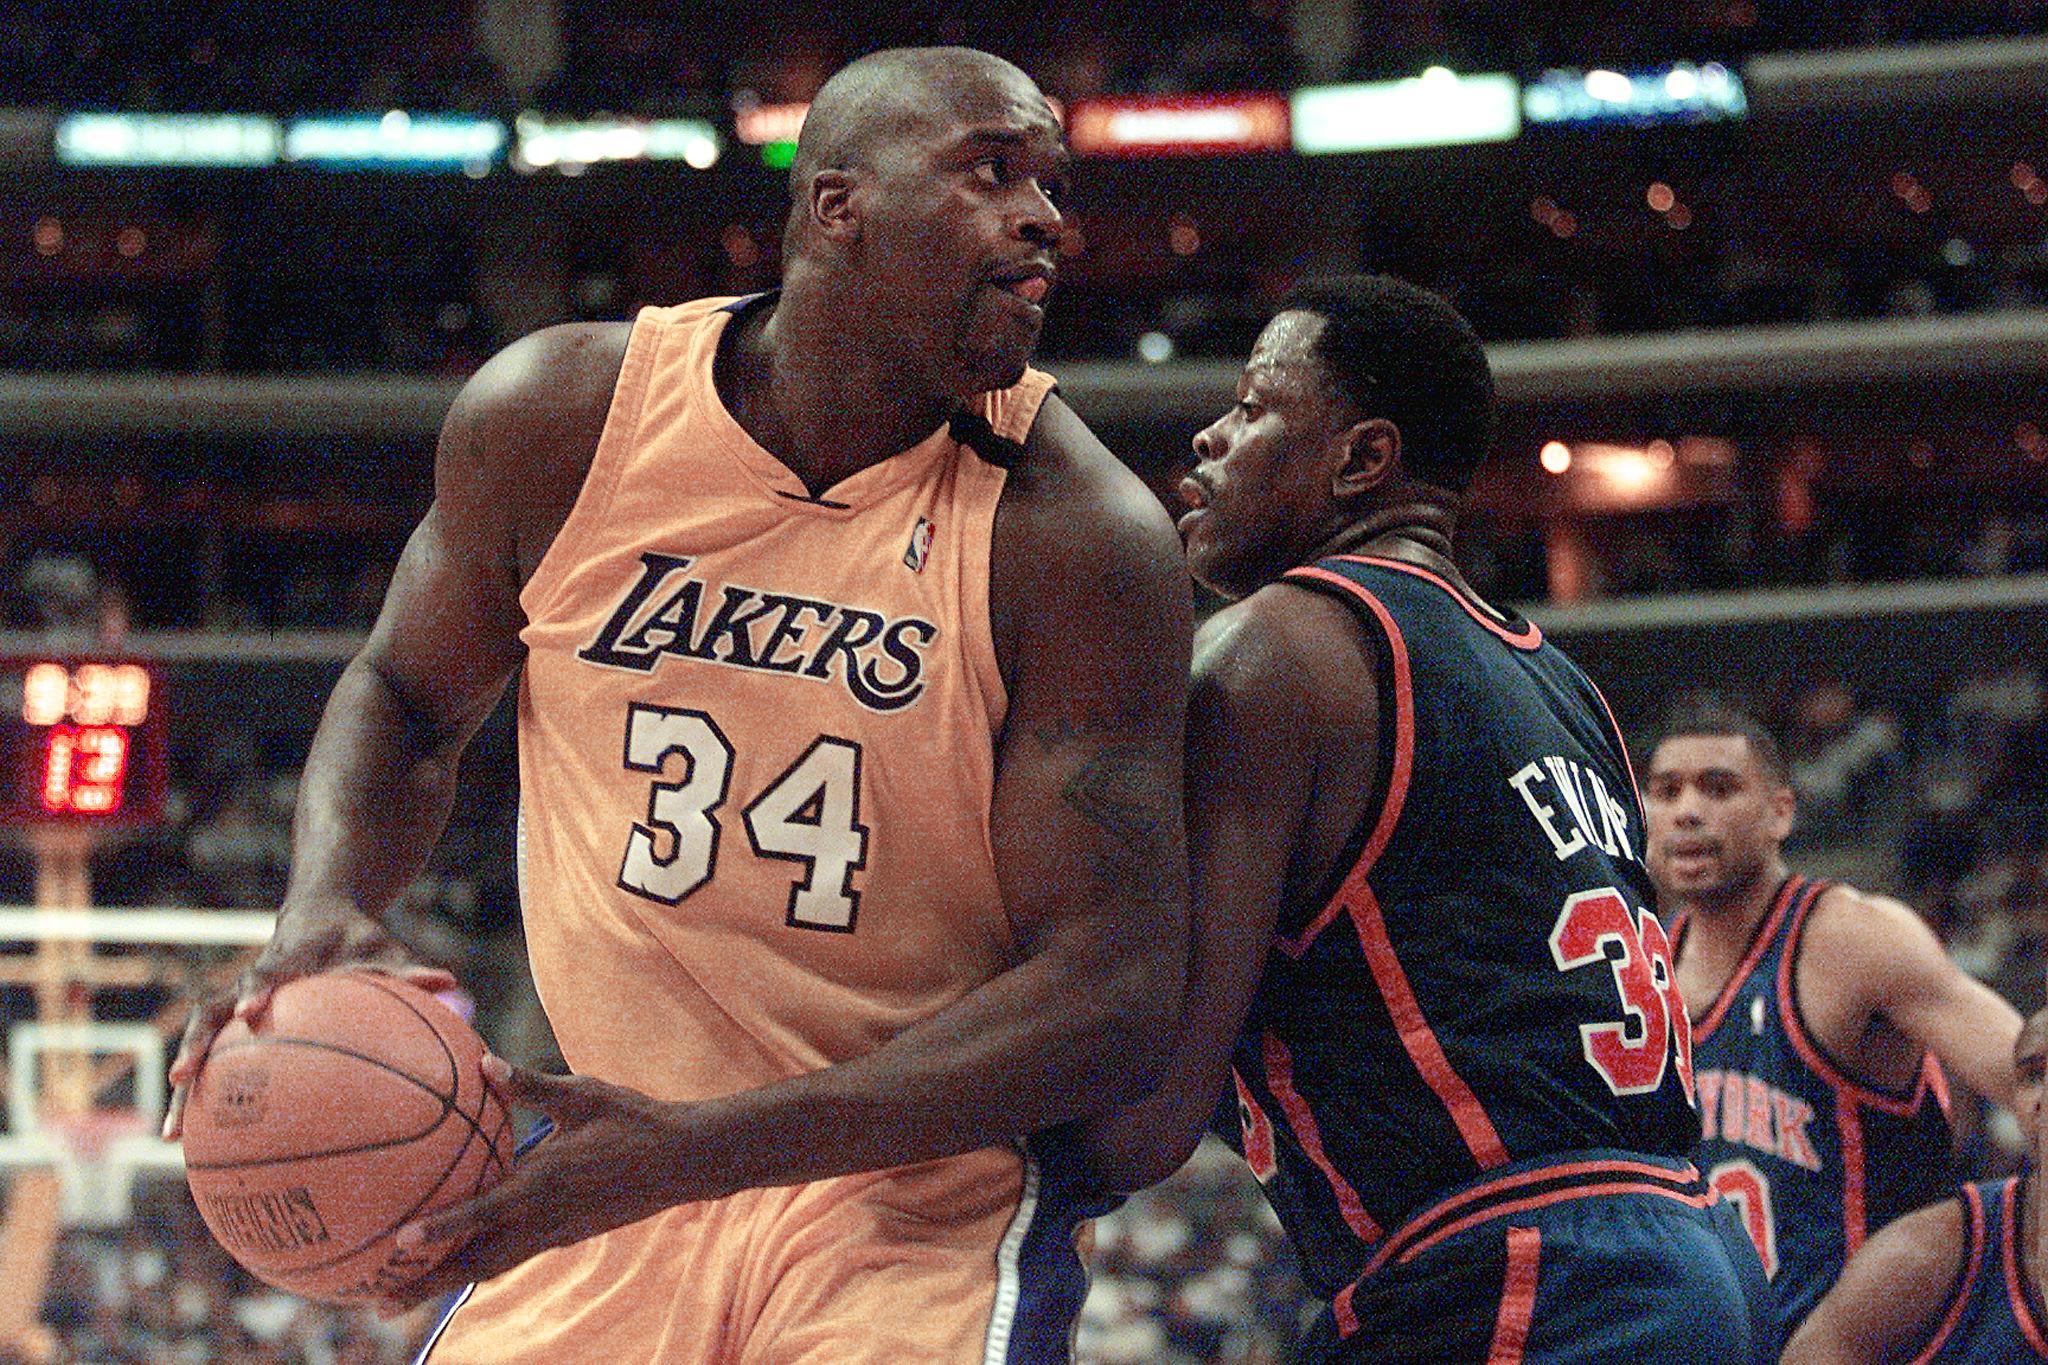 Former Los Angeles Lakers star Shaquille O'Neal backs down against New York Knicks legend Patrick Ewing during a game in 2000